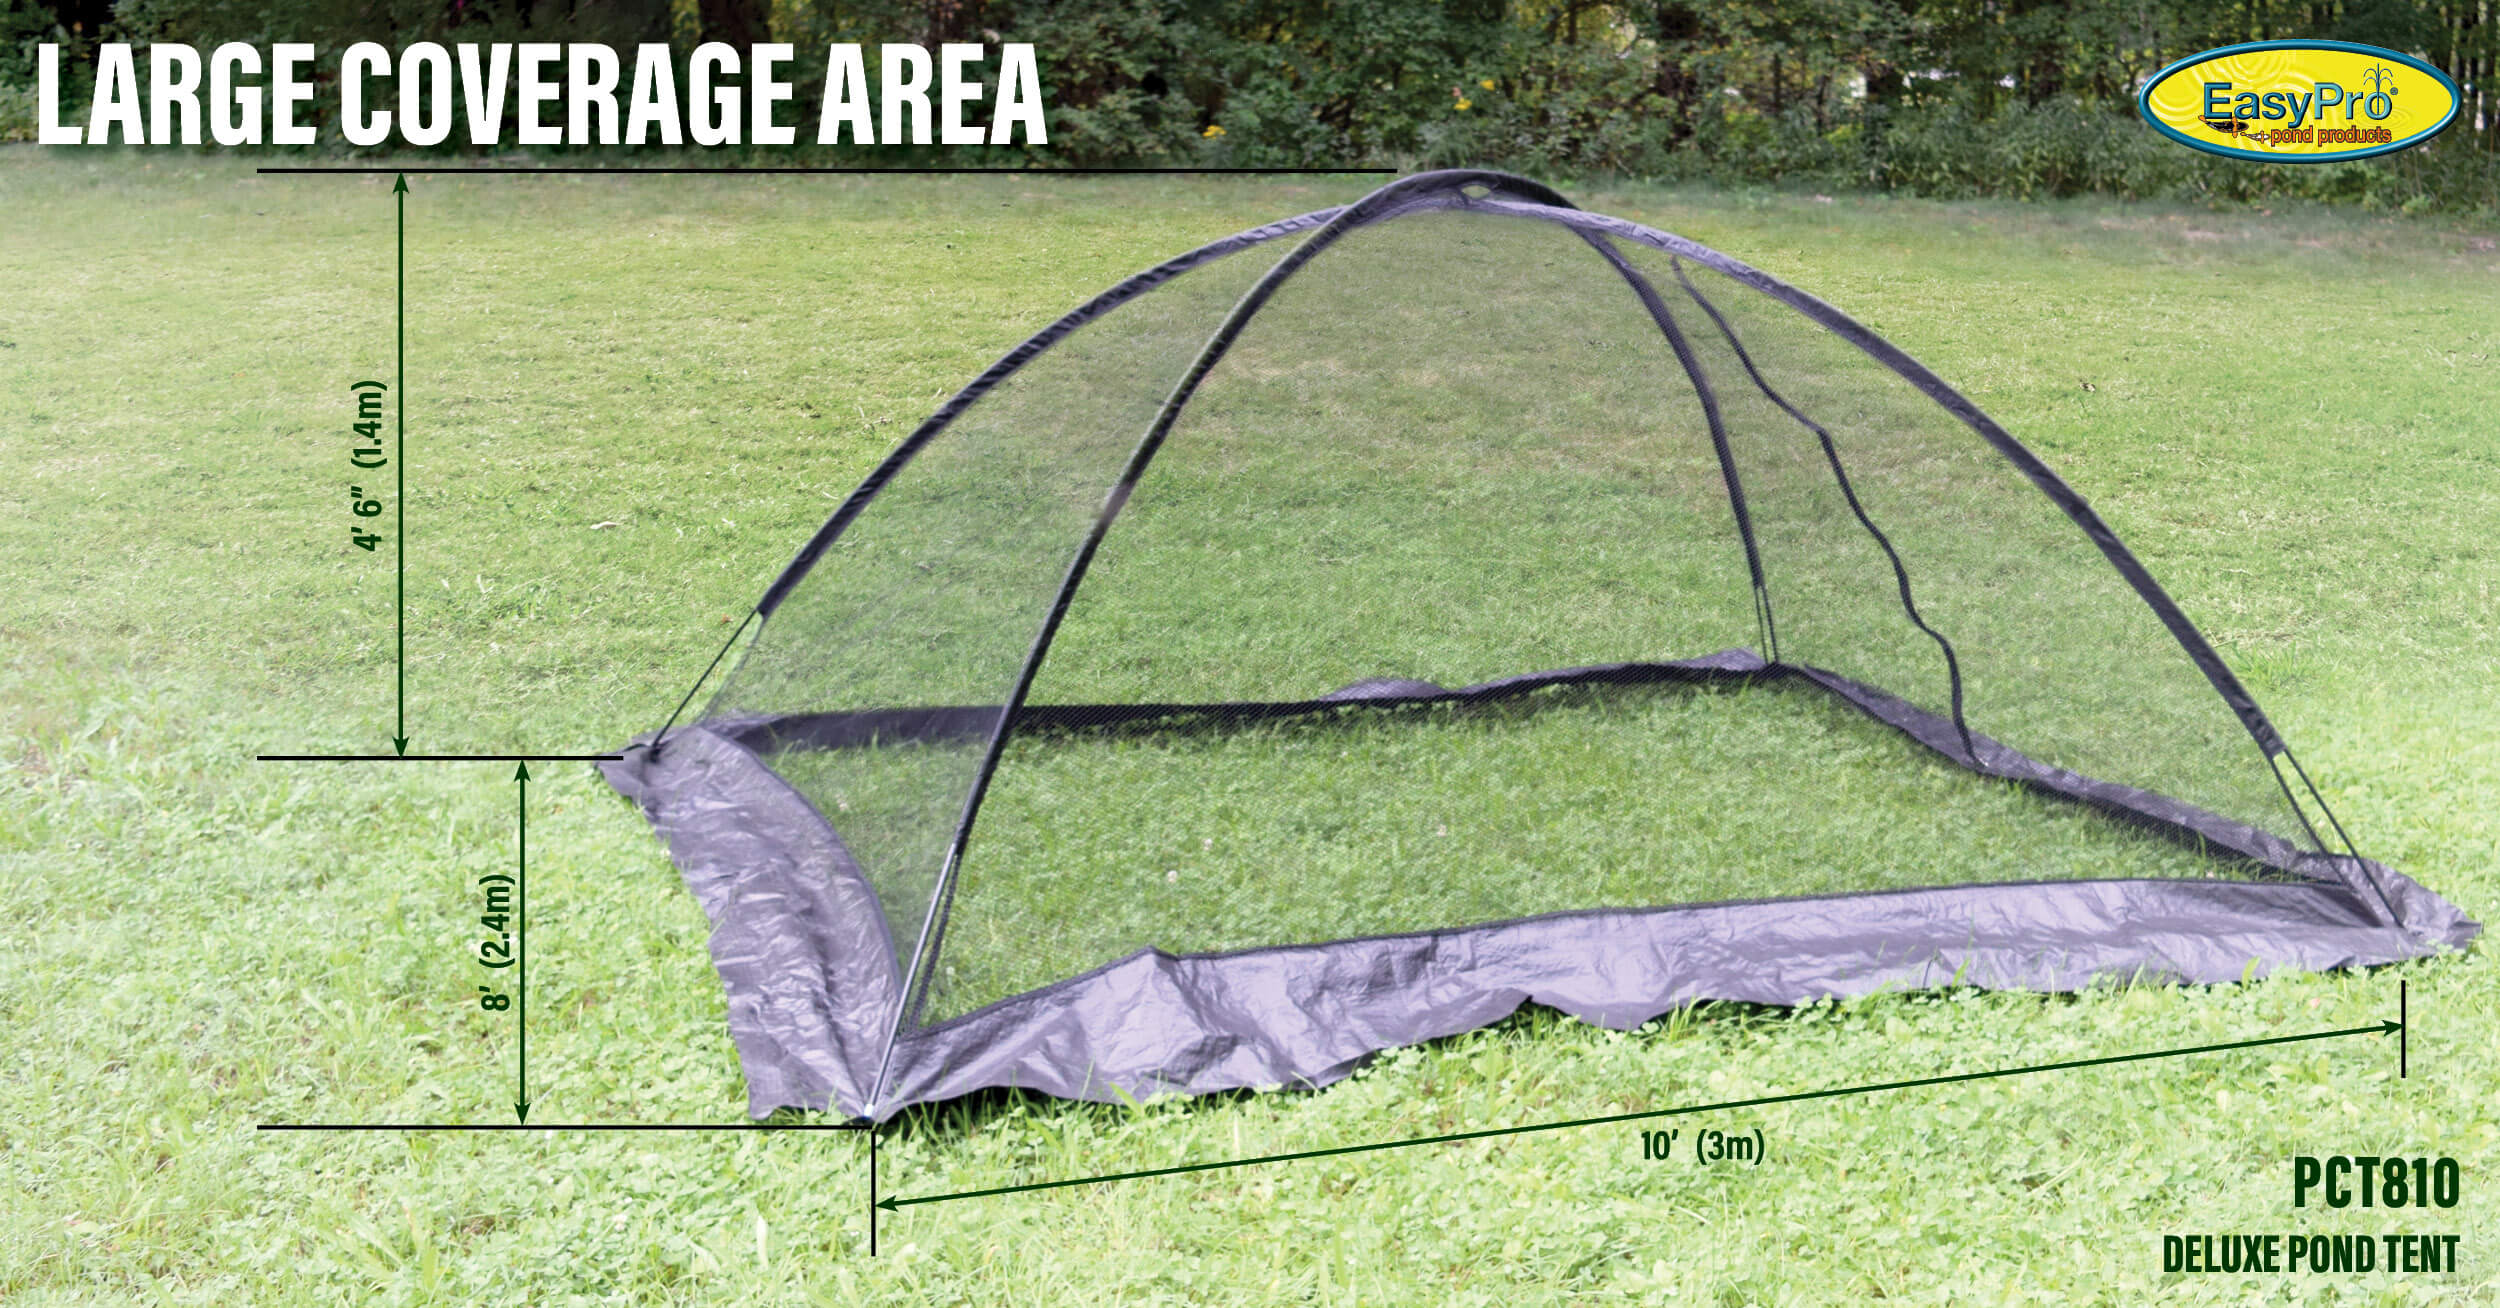 EasyPro Deluxe Pond Cover Net (Tent) - 8 x 10 - Marquis Gardens